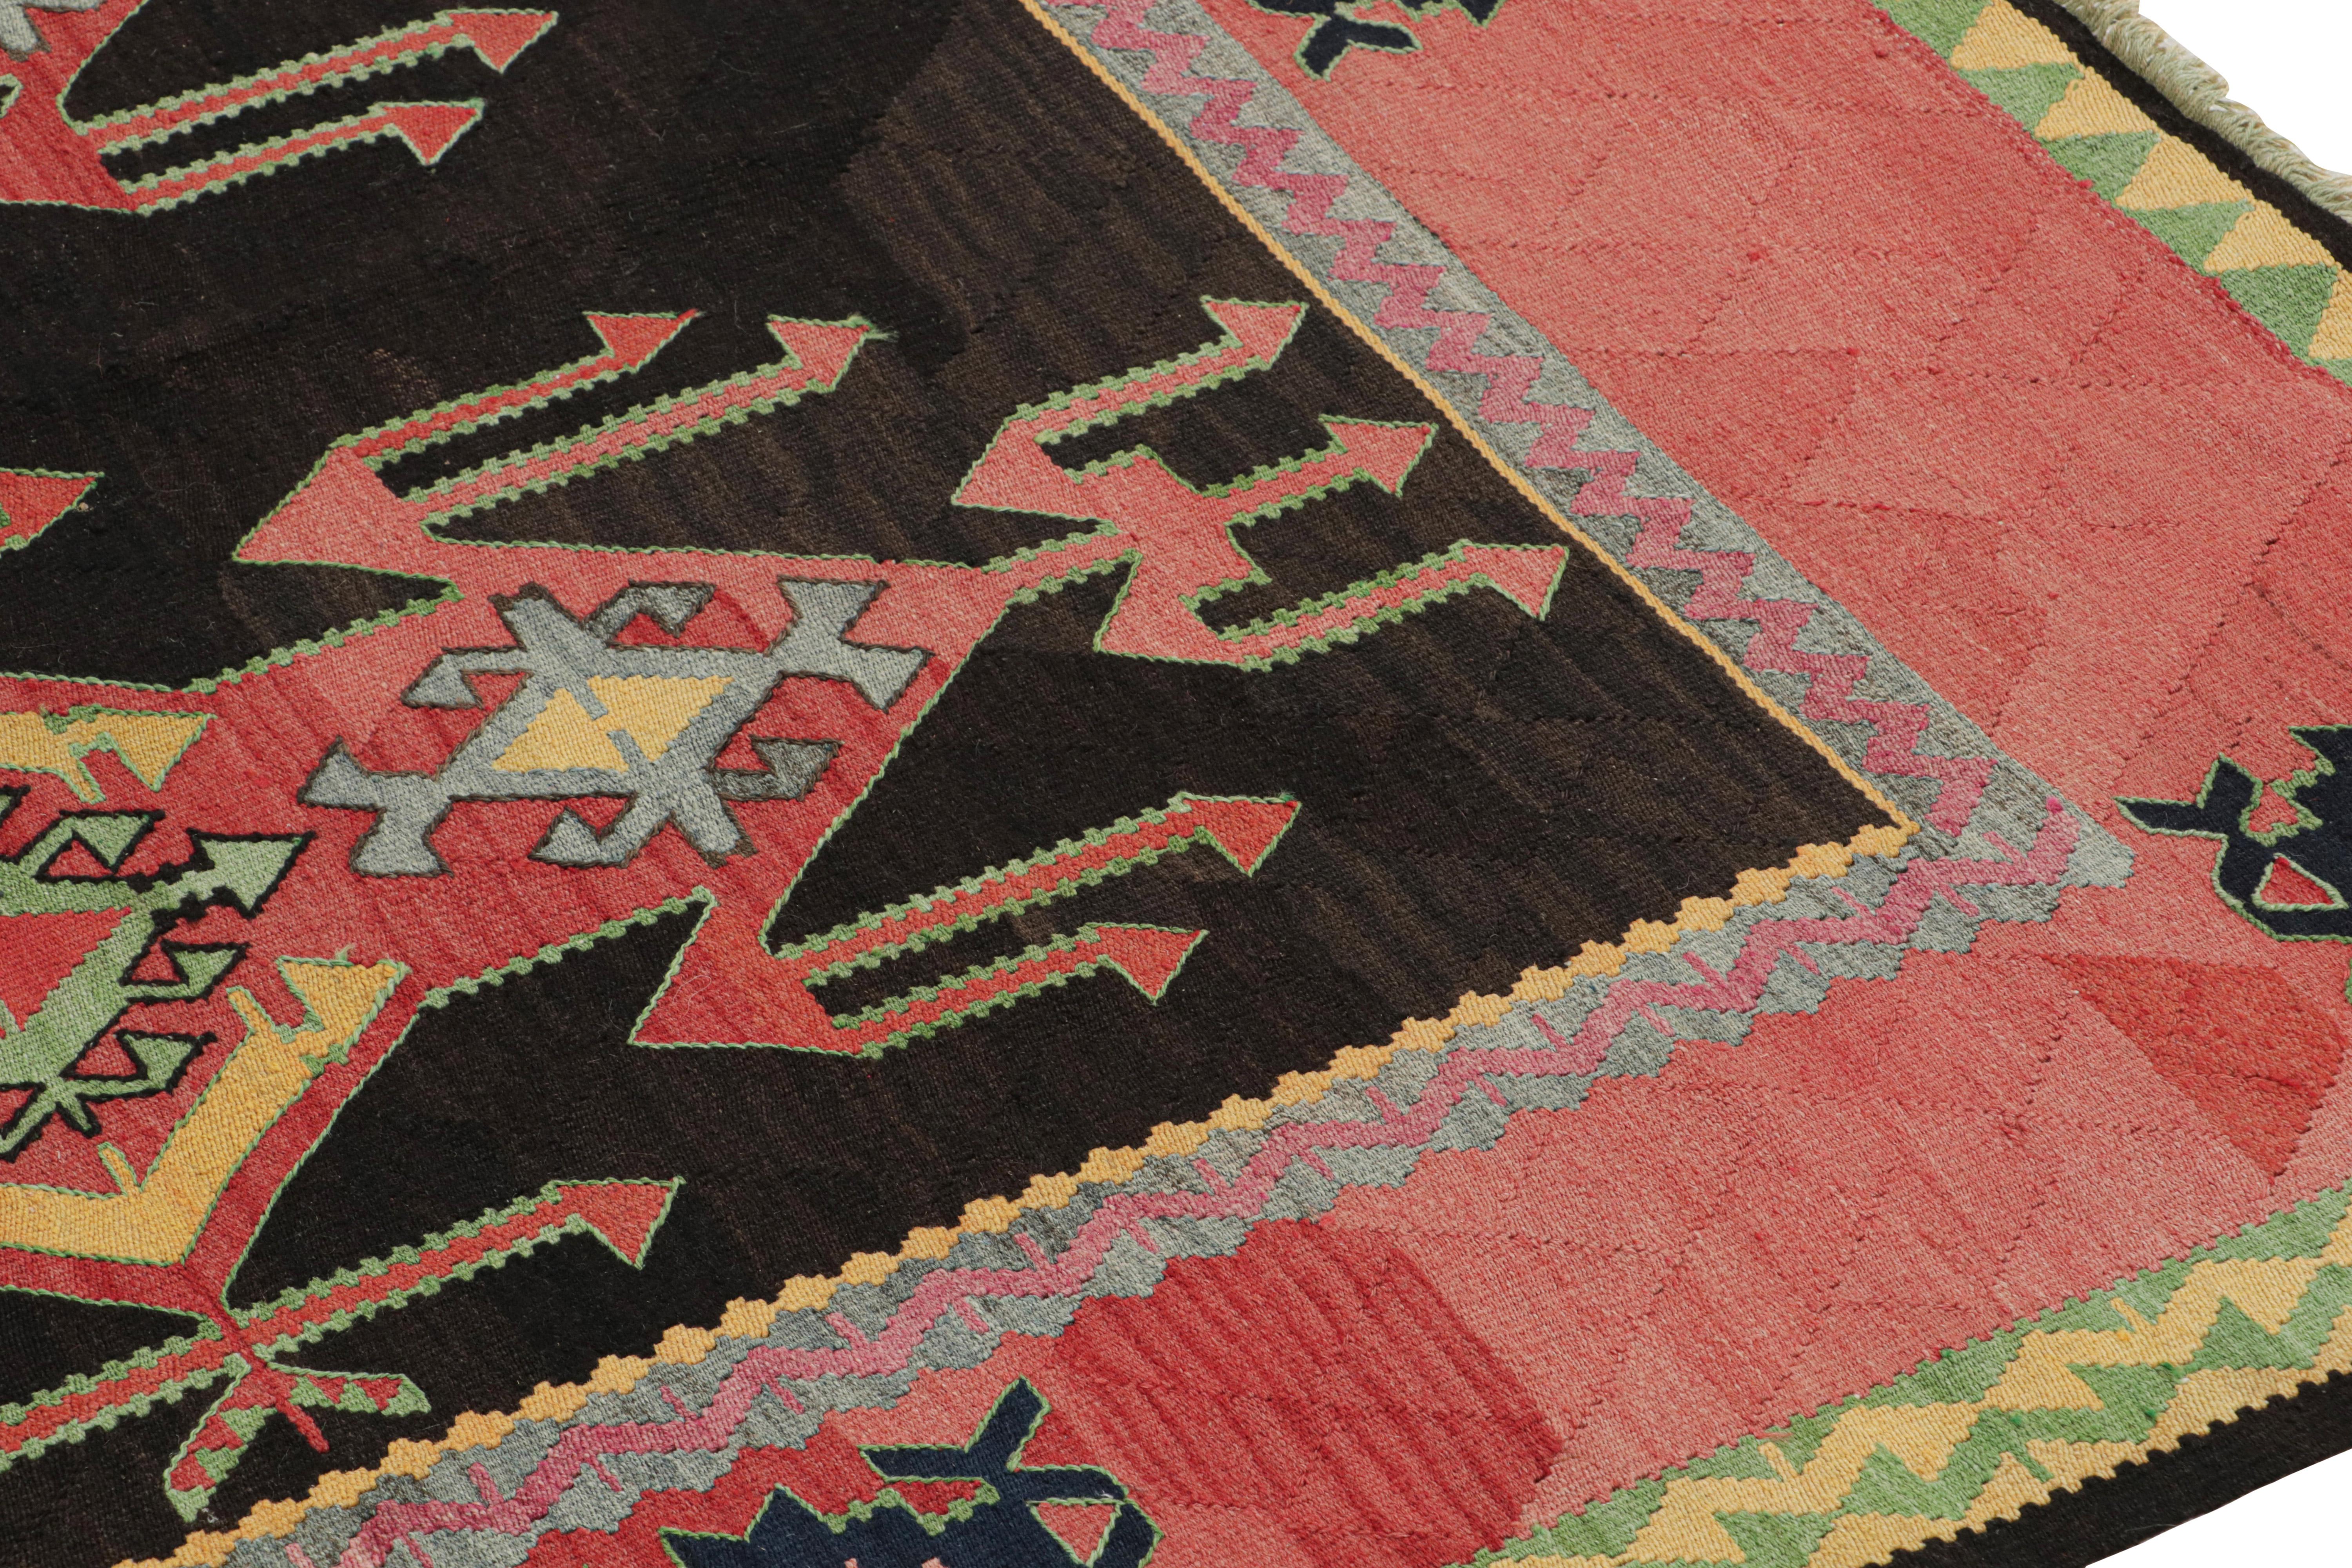 Hand-Woven Vintage Persian Kilim with Red Patterns on a Black Field, from Rug & Kilim For Sale